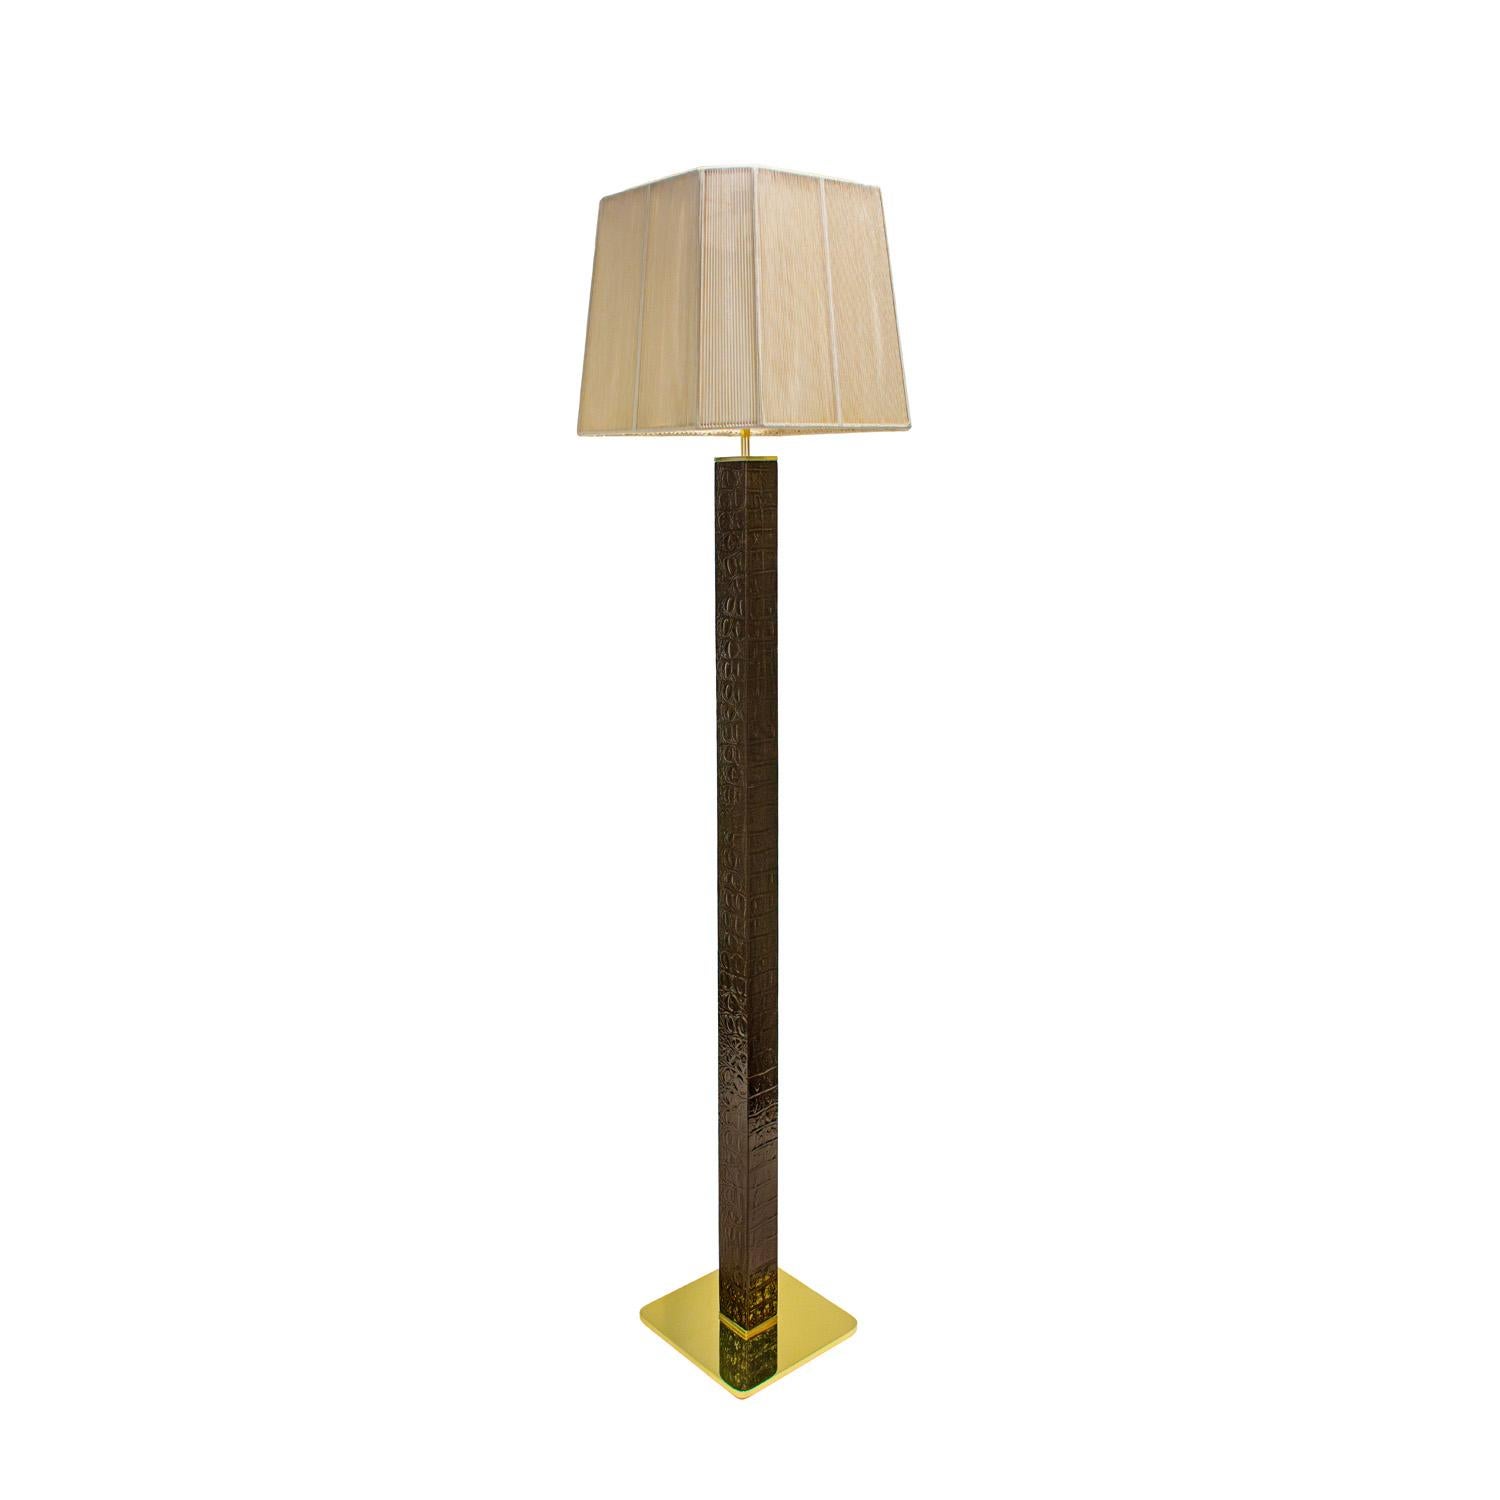 Mid-Century Modern Karl Springer Floor Lamp in Deep Brown Crocodile with Brass Accents 1970s For Sale